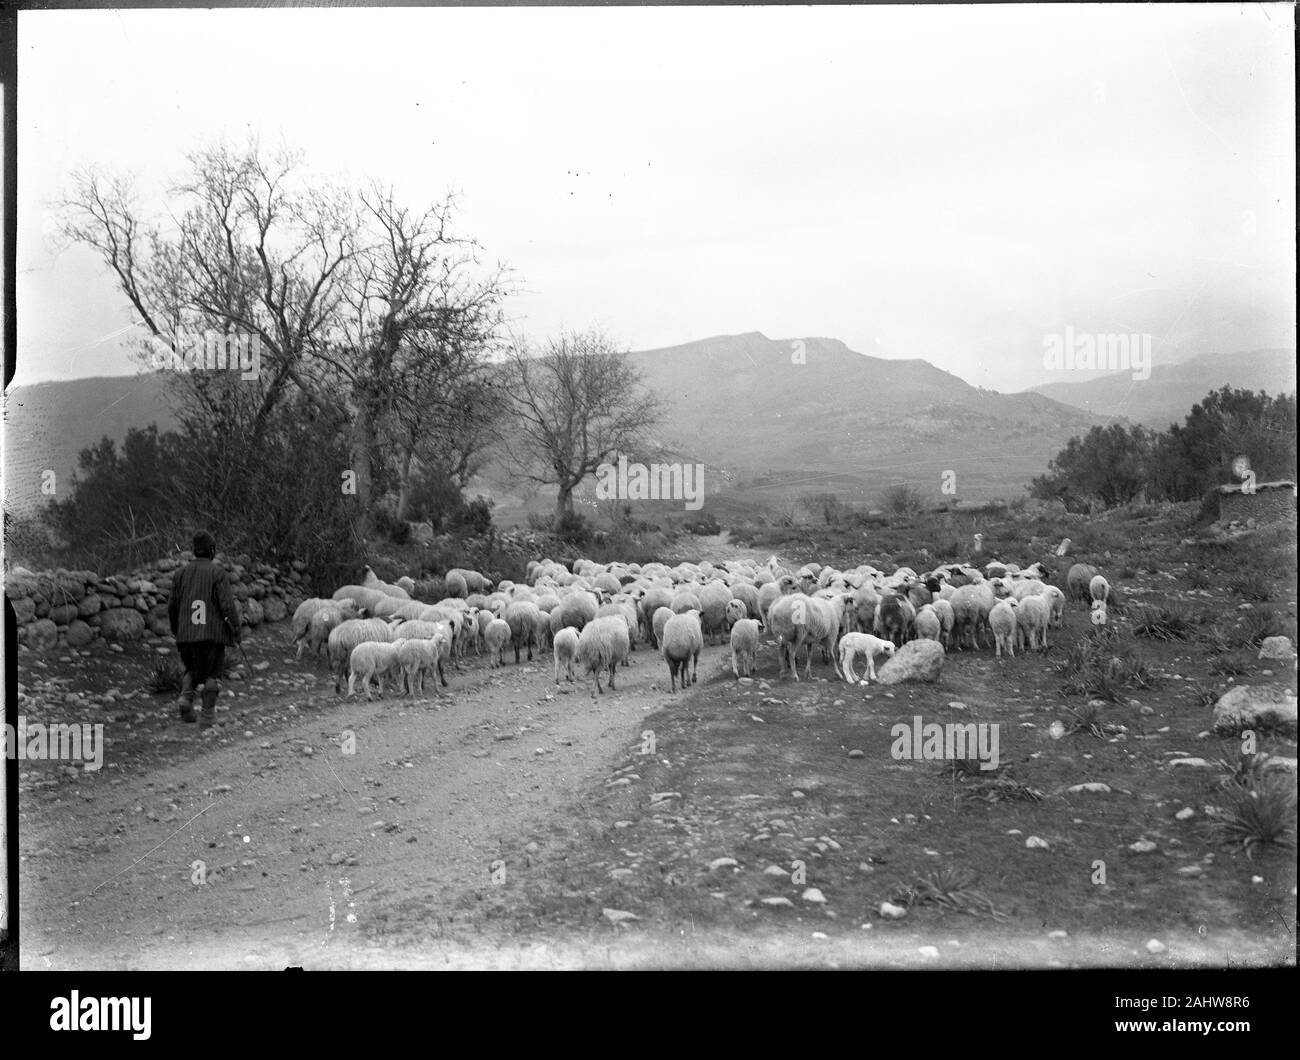 A traditionally dressed shepherd in Ottoman Turkey herding his sheep on a mountain road. Photograph dated around 1910-1920. Trees without leaves suggest autumn or winter season. Copy from a dry glass plate, originating from the Herry W. Schaefer collection. Stock Photo